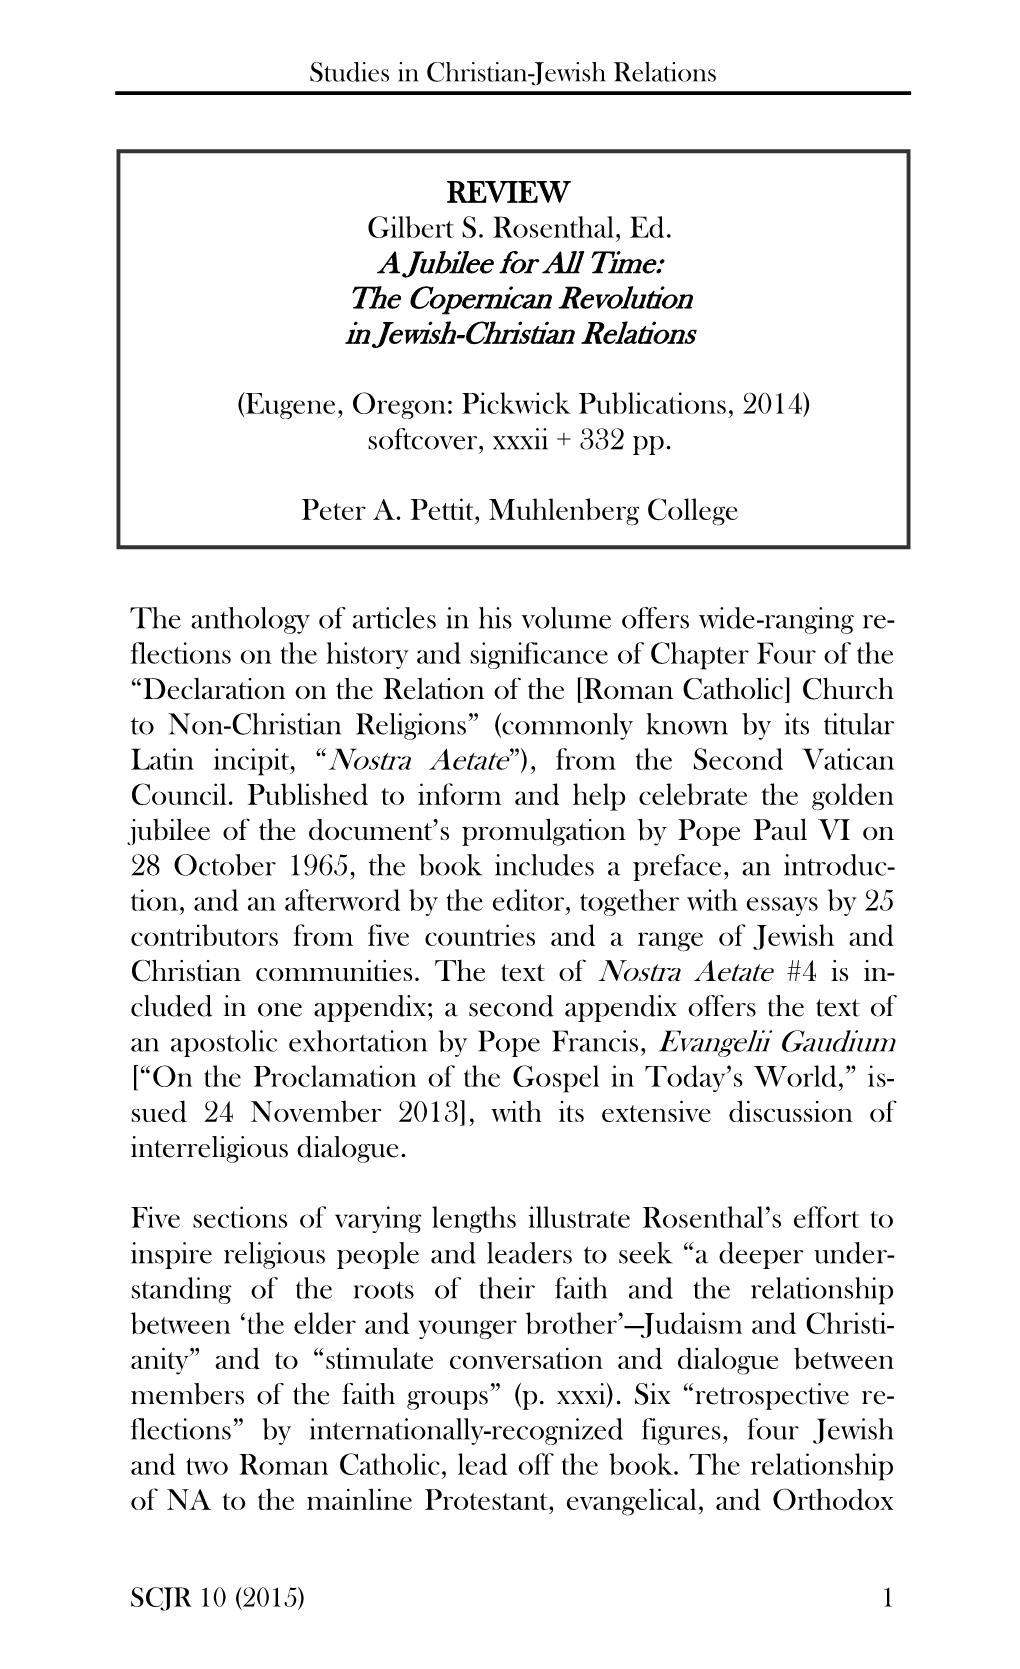 The Copernican Revolution in Jewish-Christian Relations